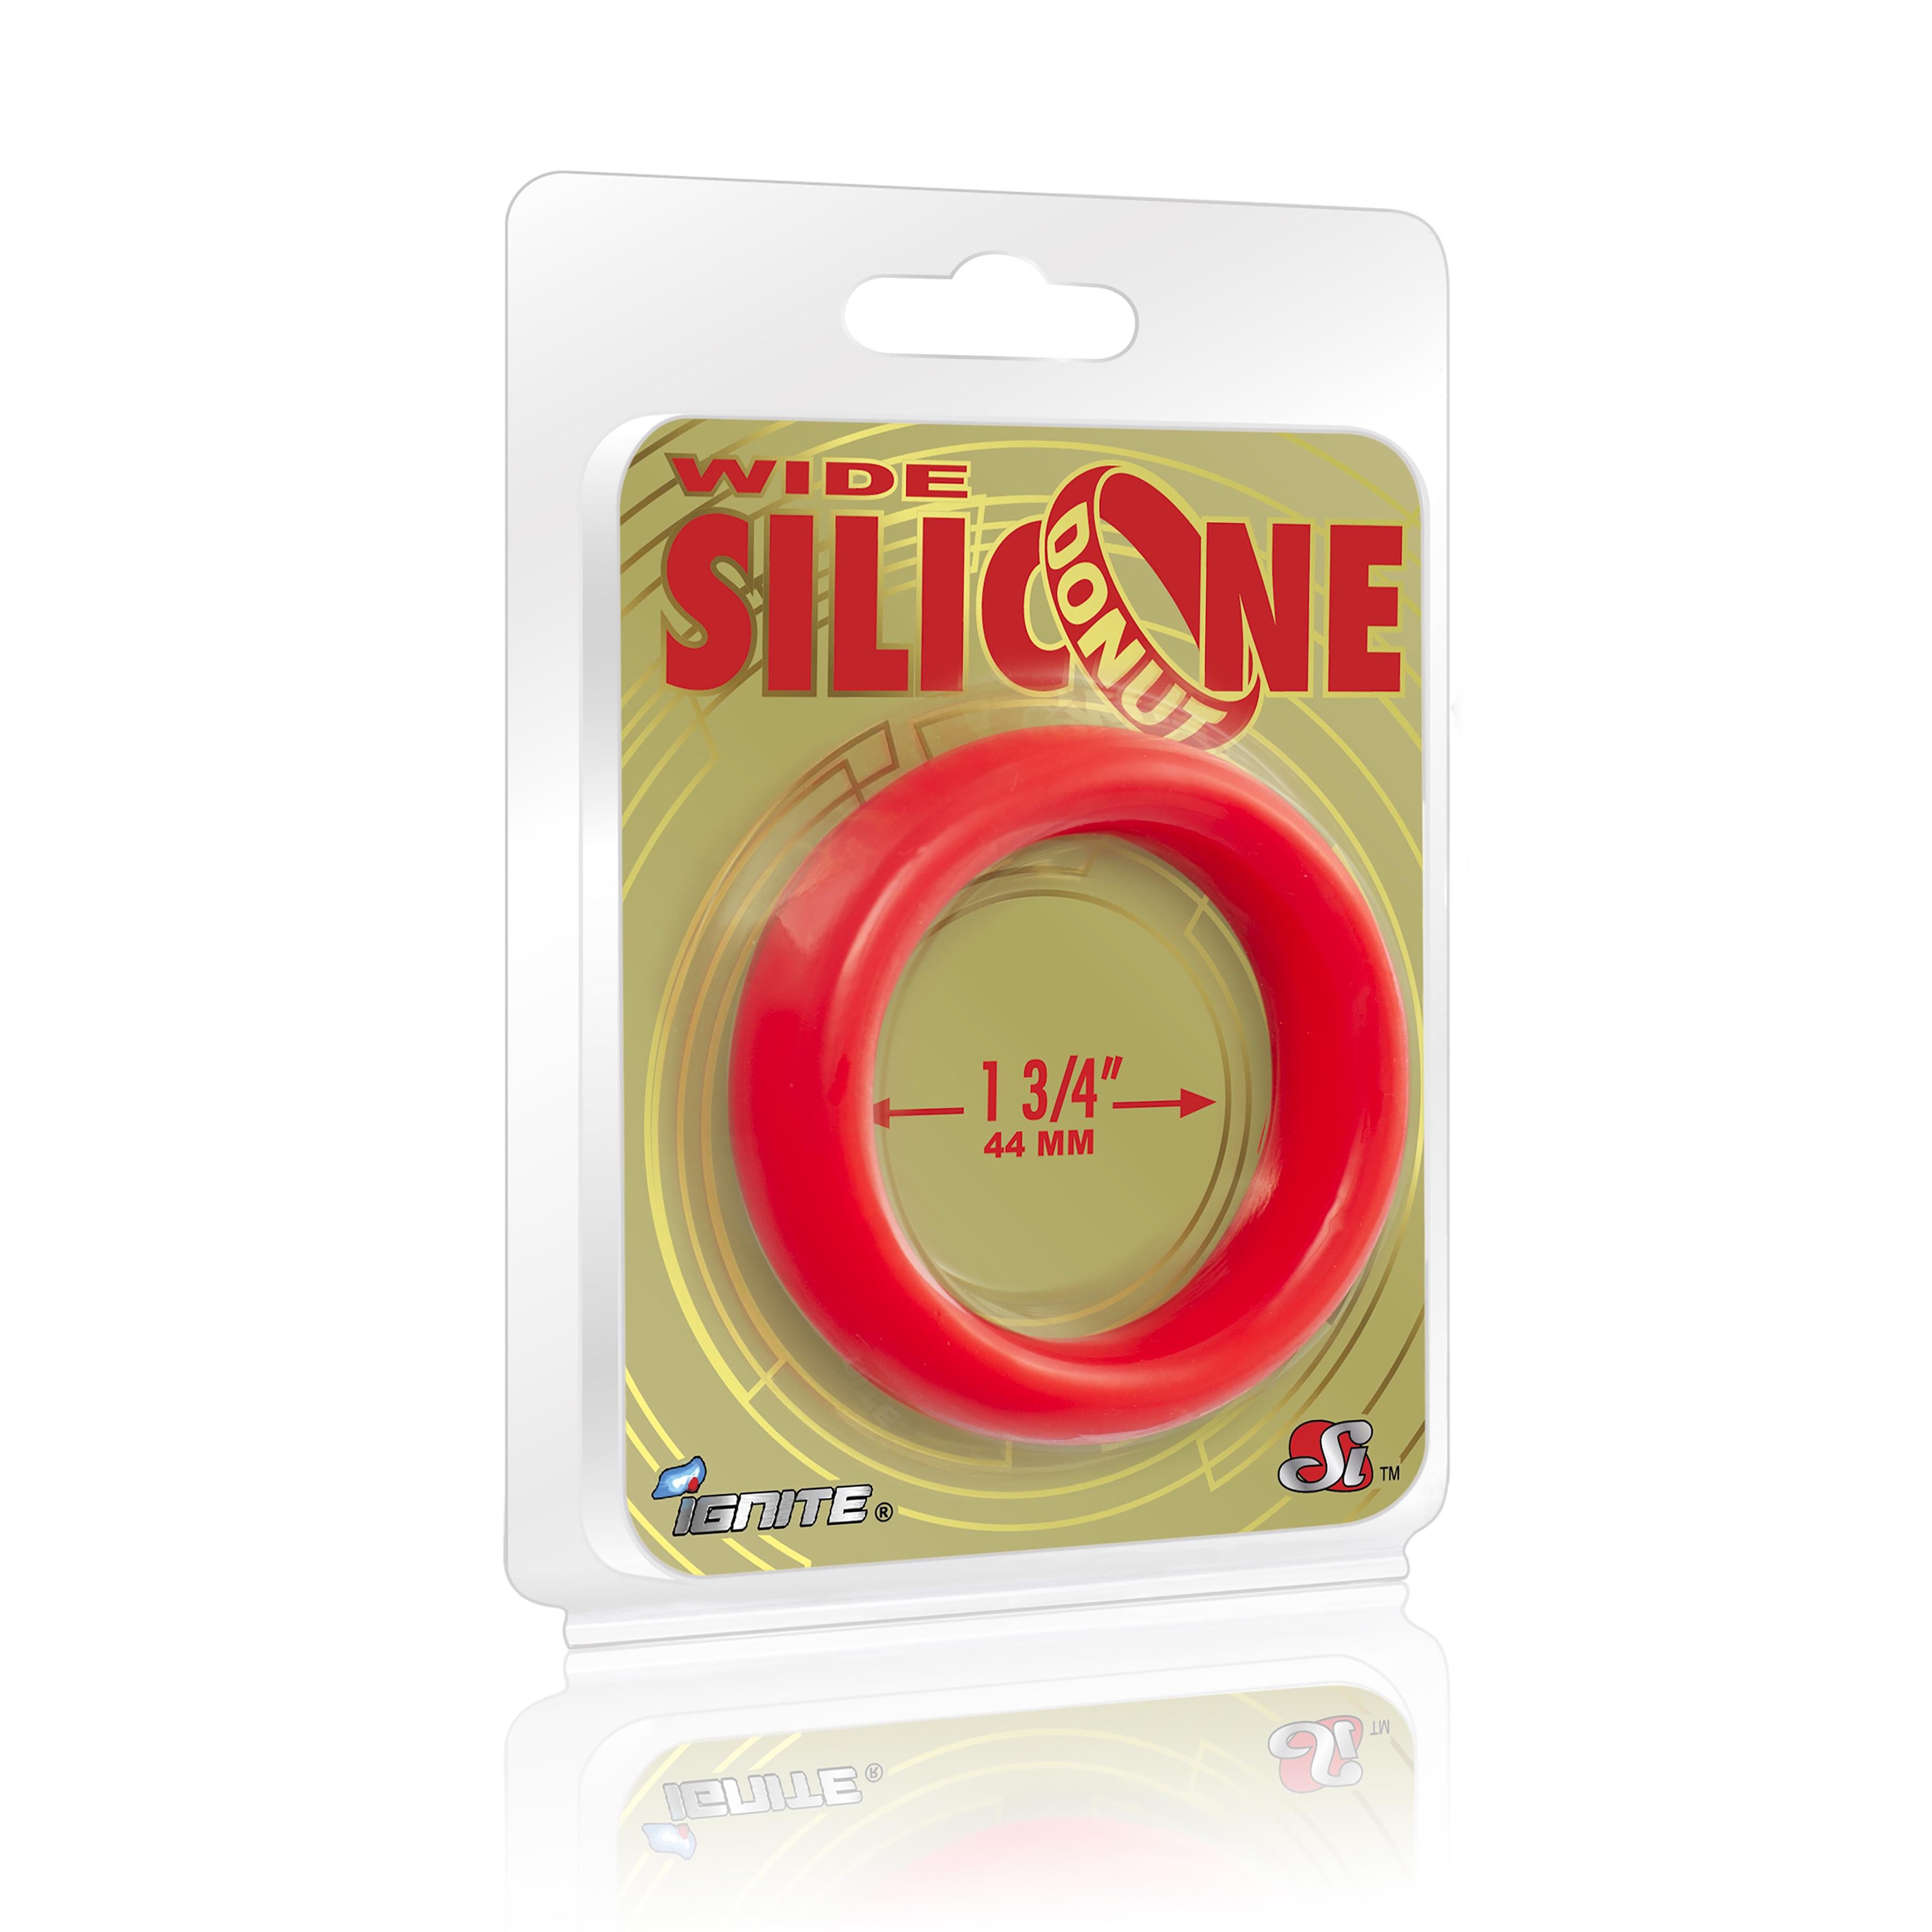 SI IGNITE Wide Silicone Donut Cockring, ¯ 44 mm, Red